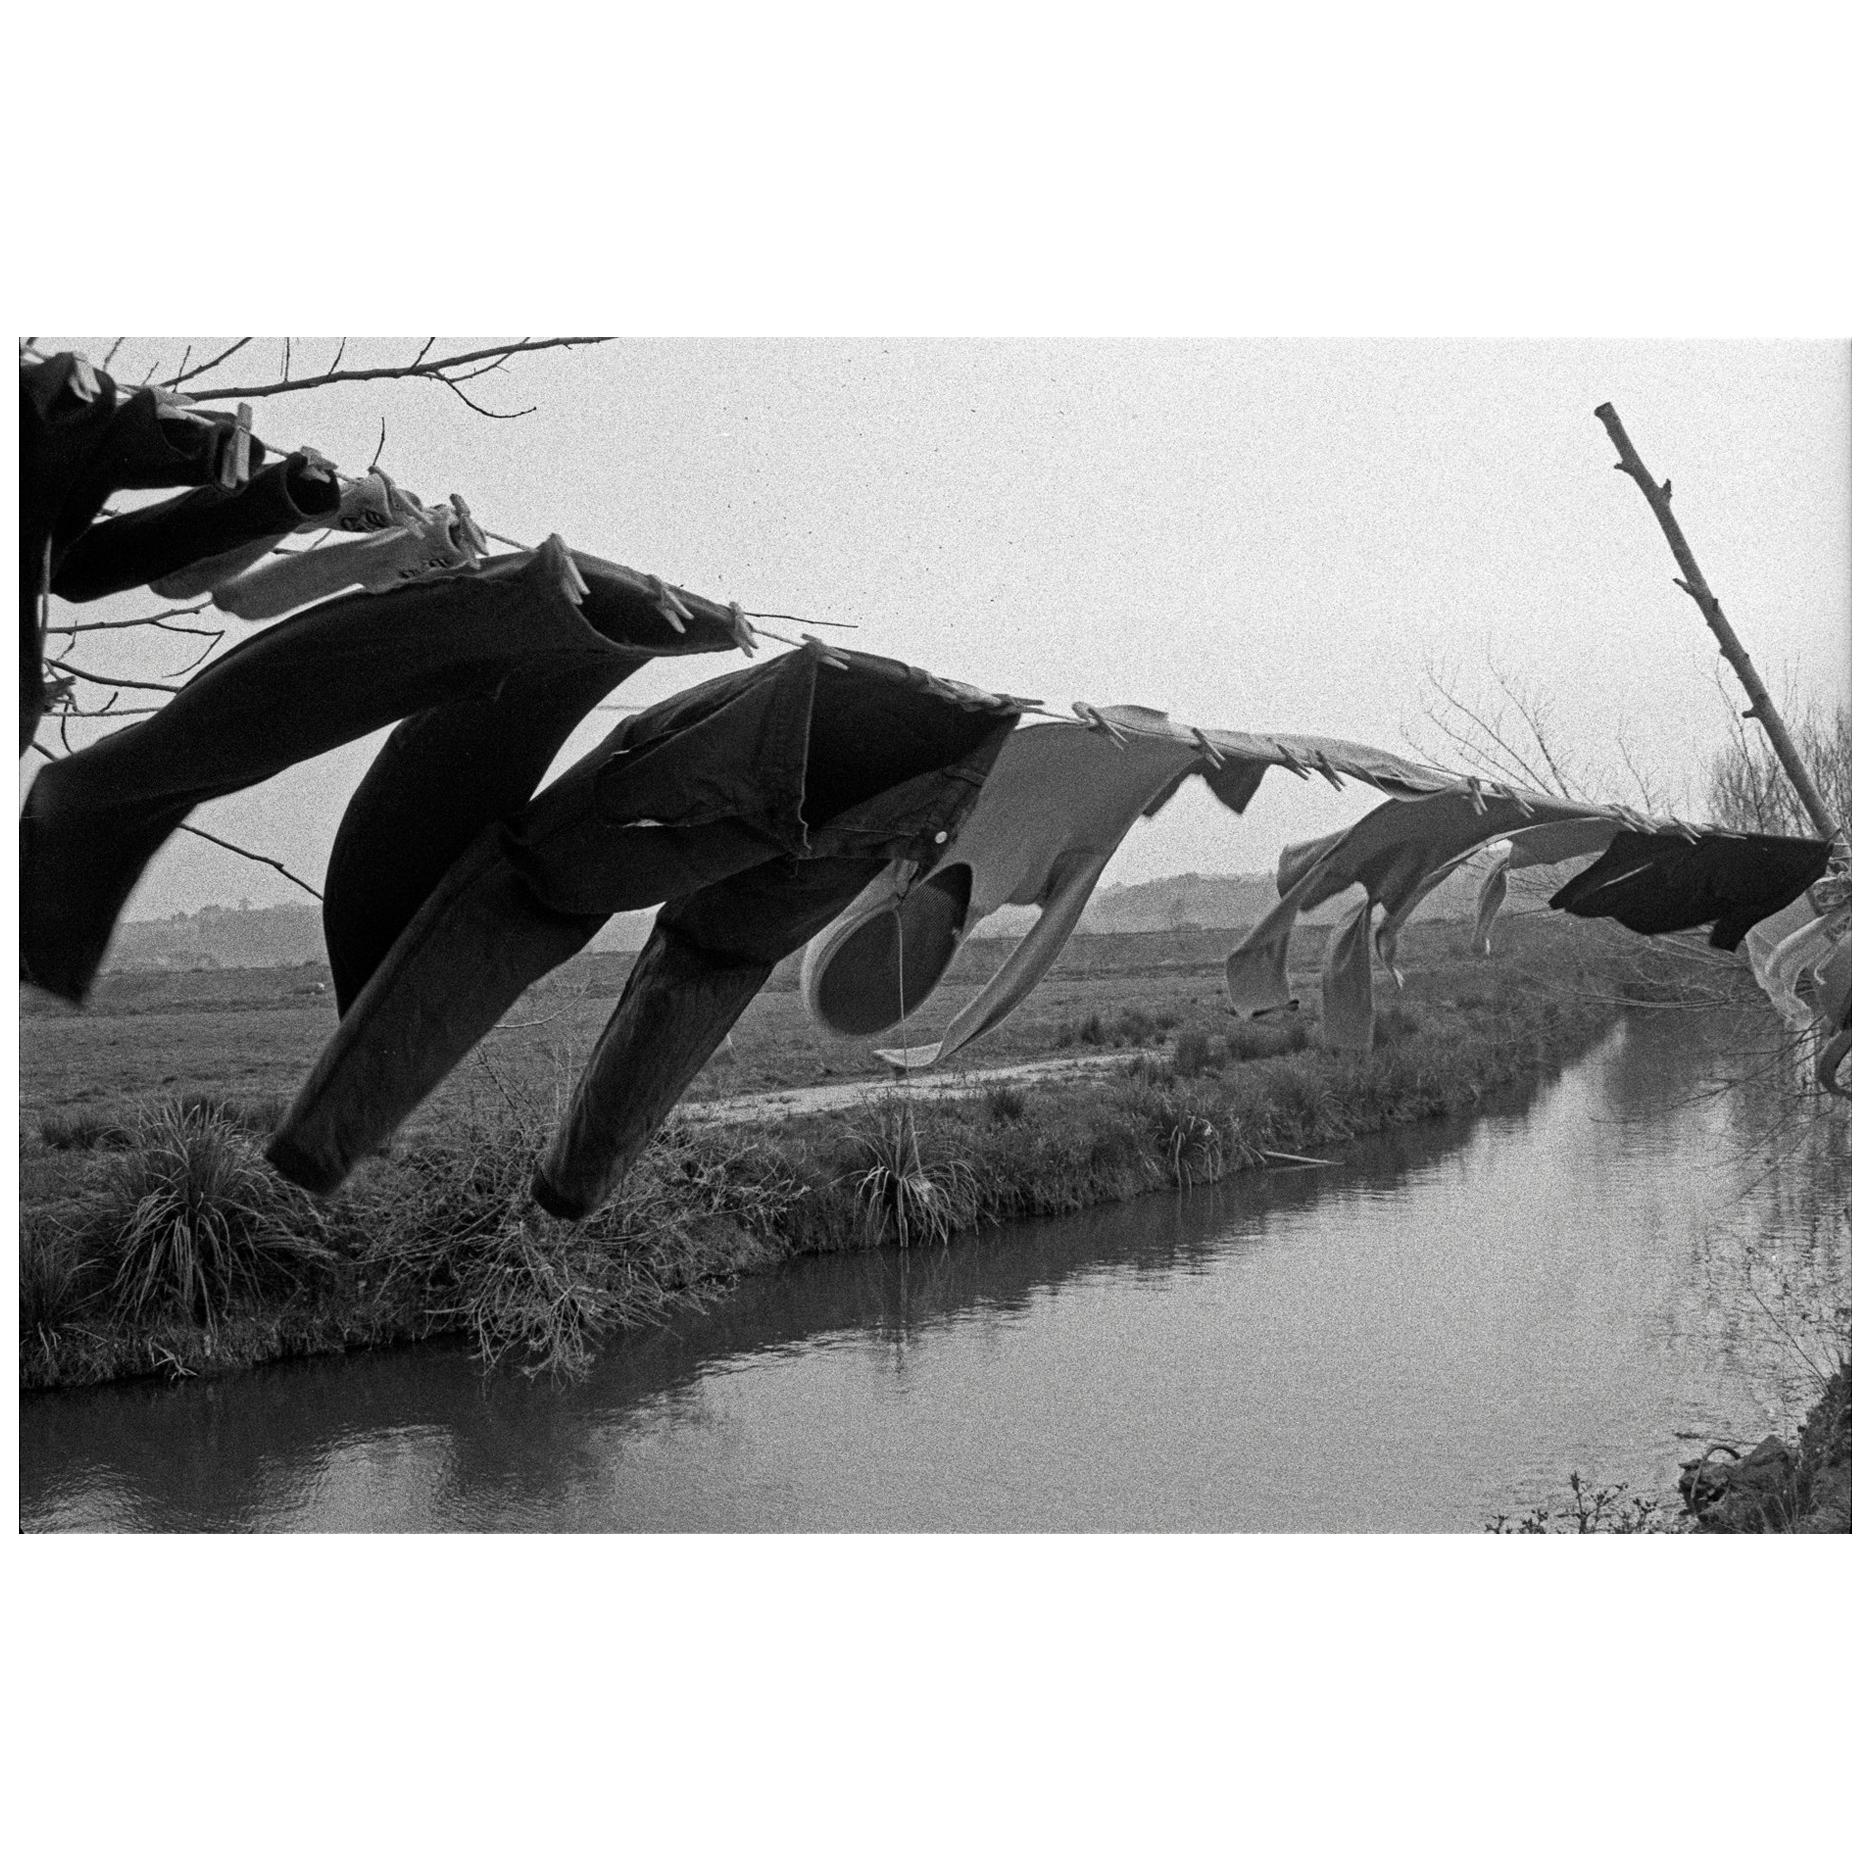 "The Clothesline" Black & White Photography Gelatin Silver Print by A.M.Cortesão For Sale